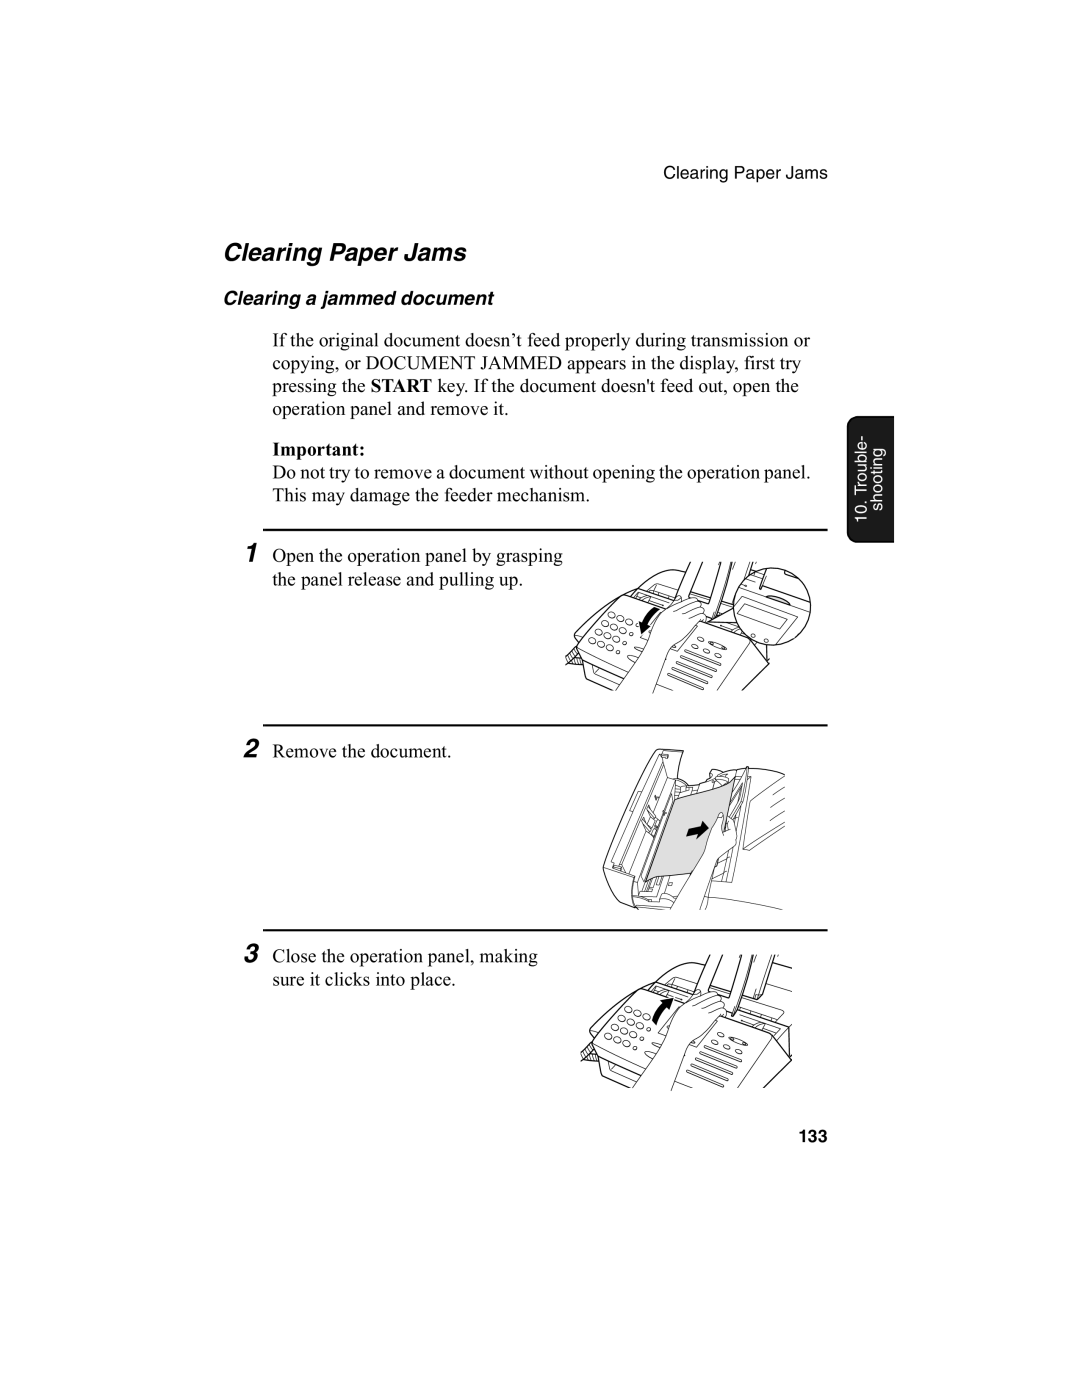 Sharp FO-2970M operation manual Clearing Paper Jams, Clearing a jammed document 